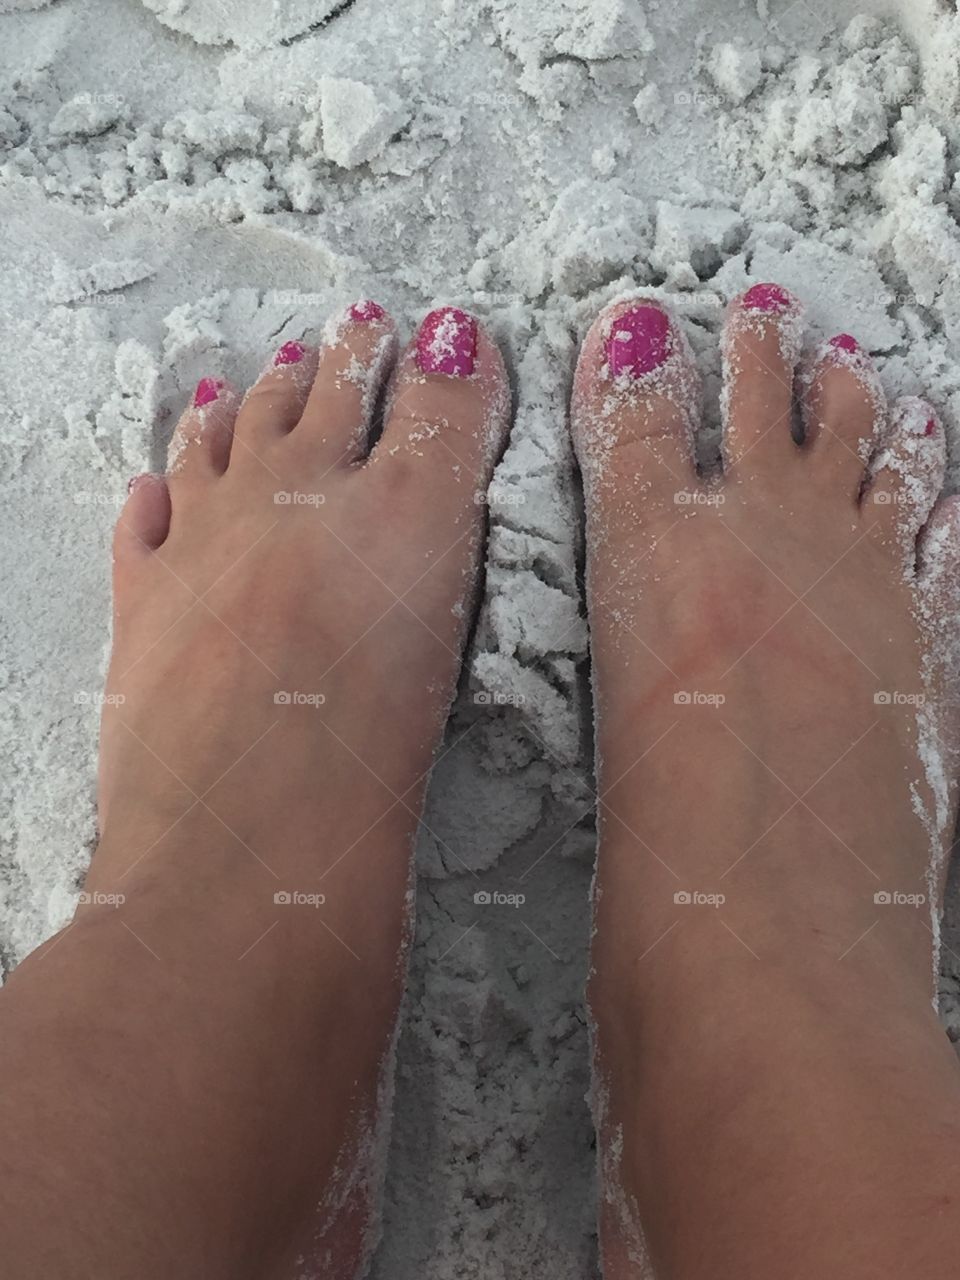 Relaxing with my toes in the sand